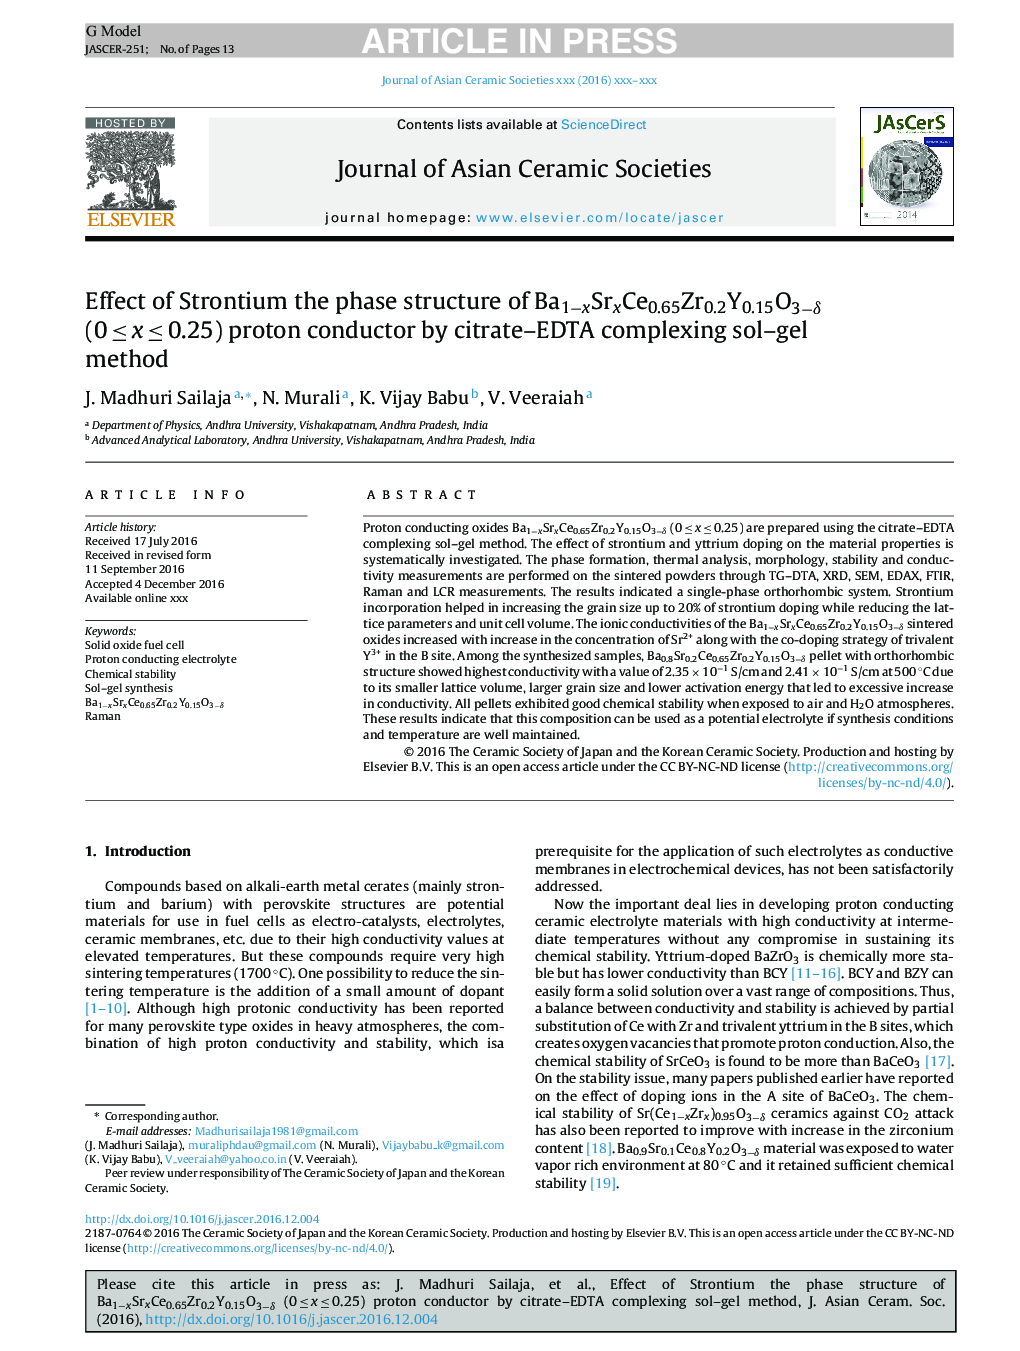 Effect of Strontium the phase structure of Ba1âxSrxCe0.65Zr0.2Y0.15O3âÎ´ (0Â â¤Â xÂ â¤Â 0.25) proton conductor by citrate-EDTA complexing sol-gel method